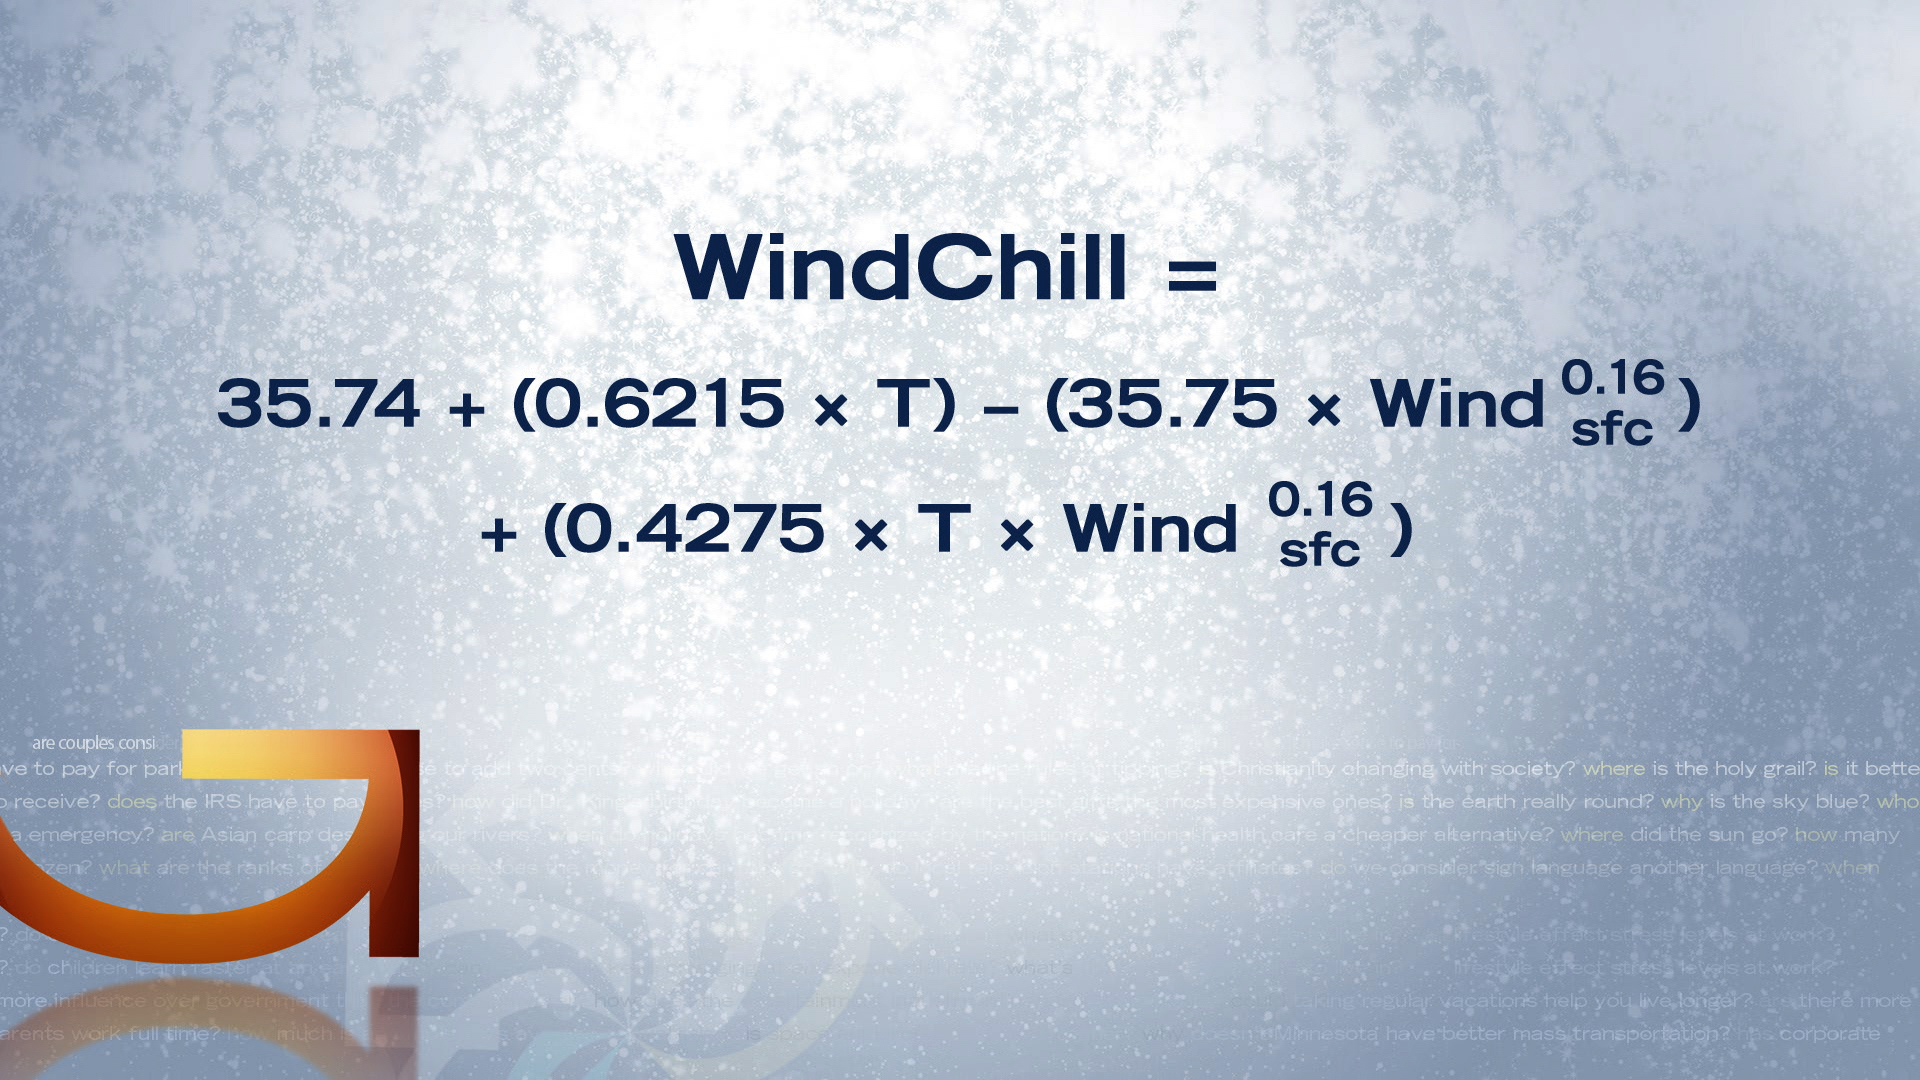 indiana wind chill chart for school